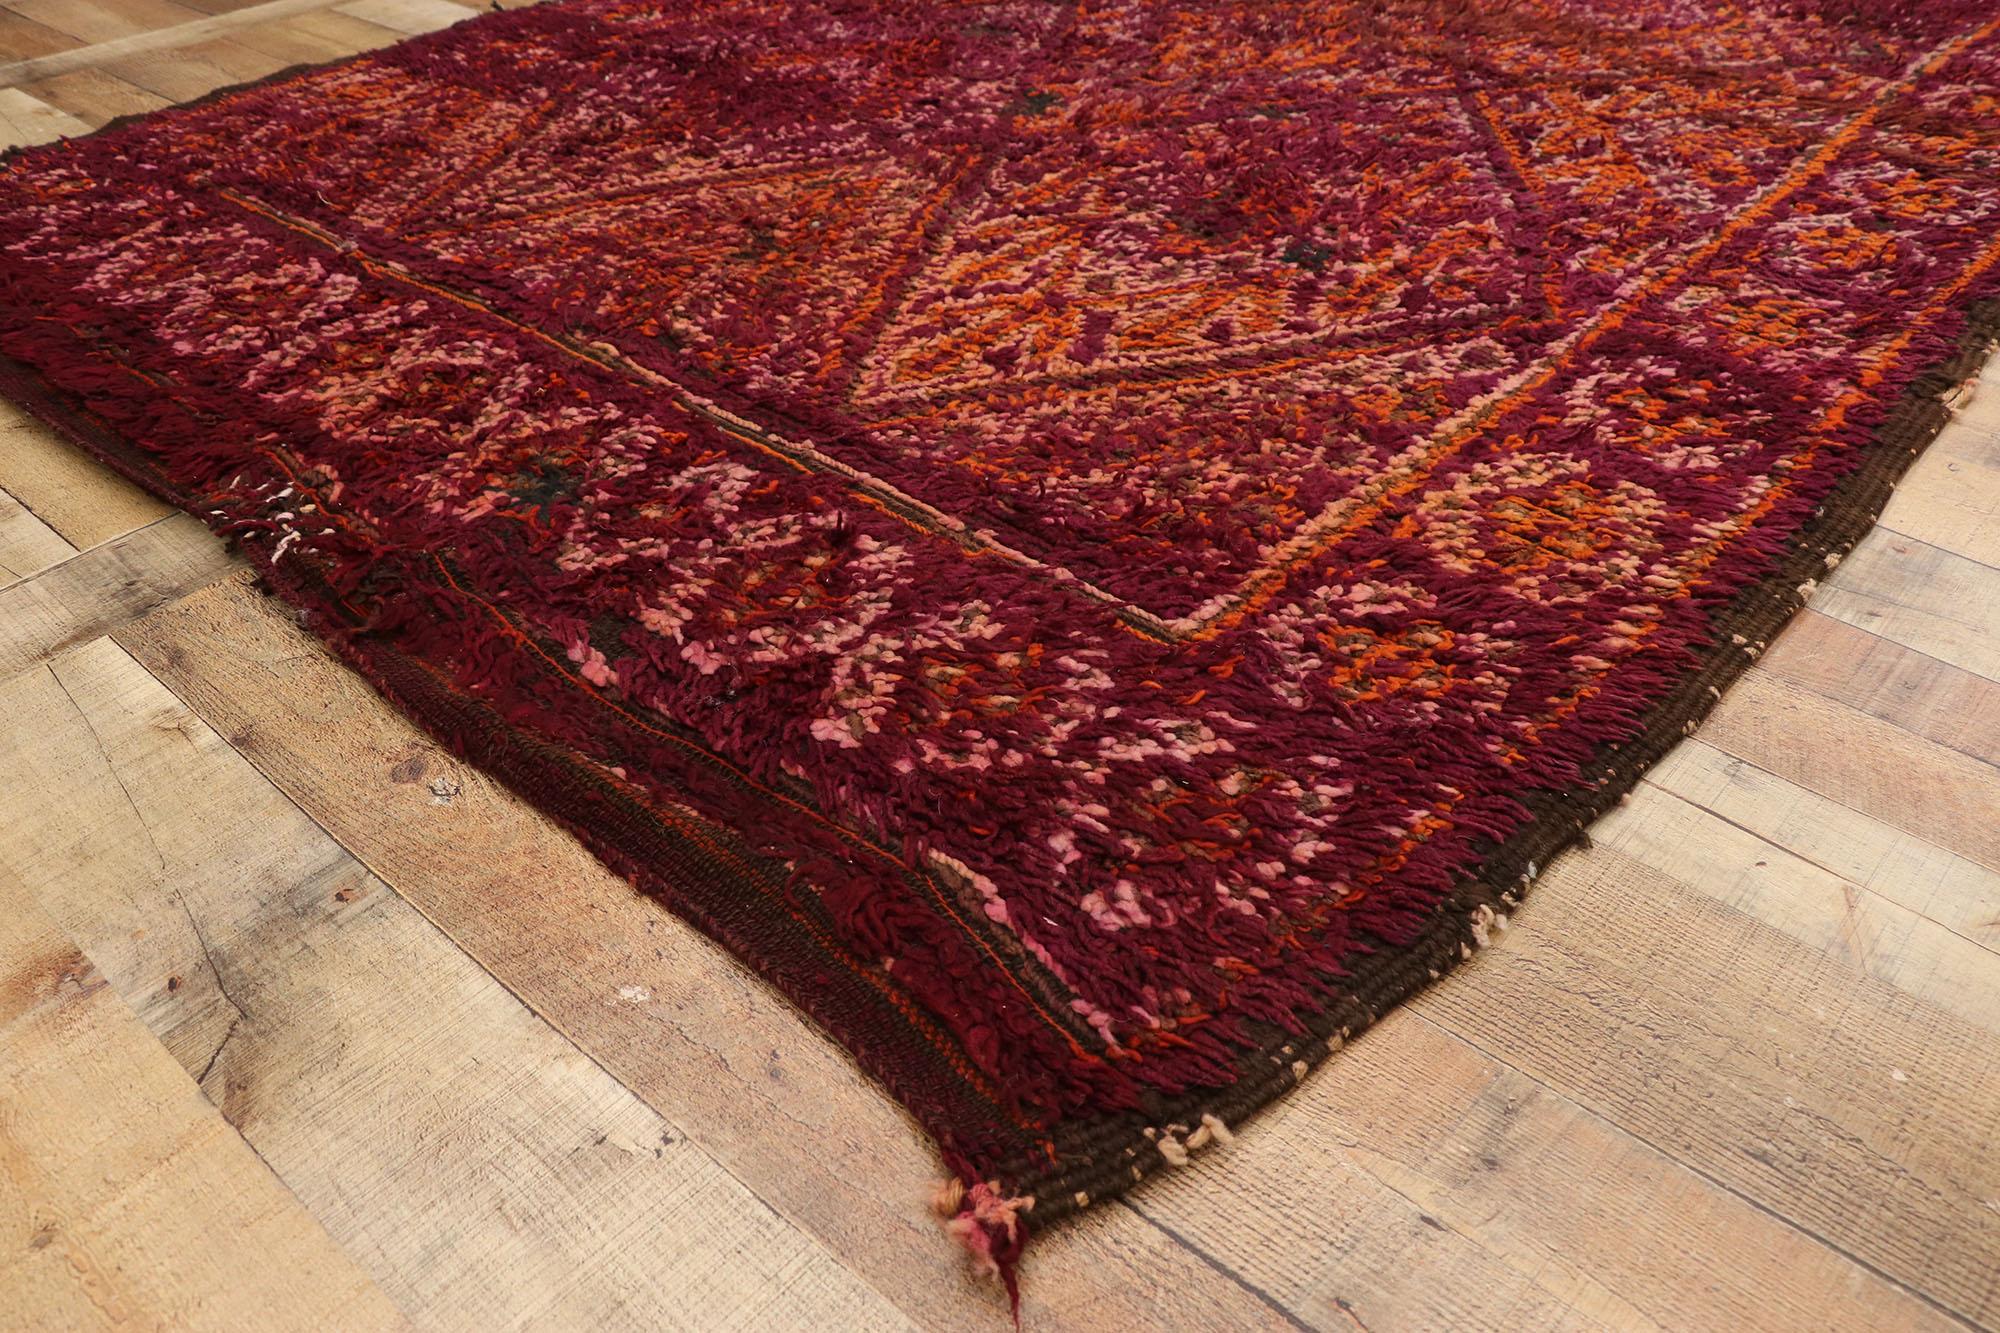 Hand-Knotted Vintage Burgundy Beni M'Guild Moroccan Rug with Retro Modern Style